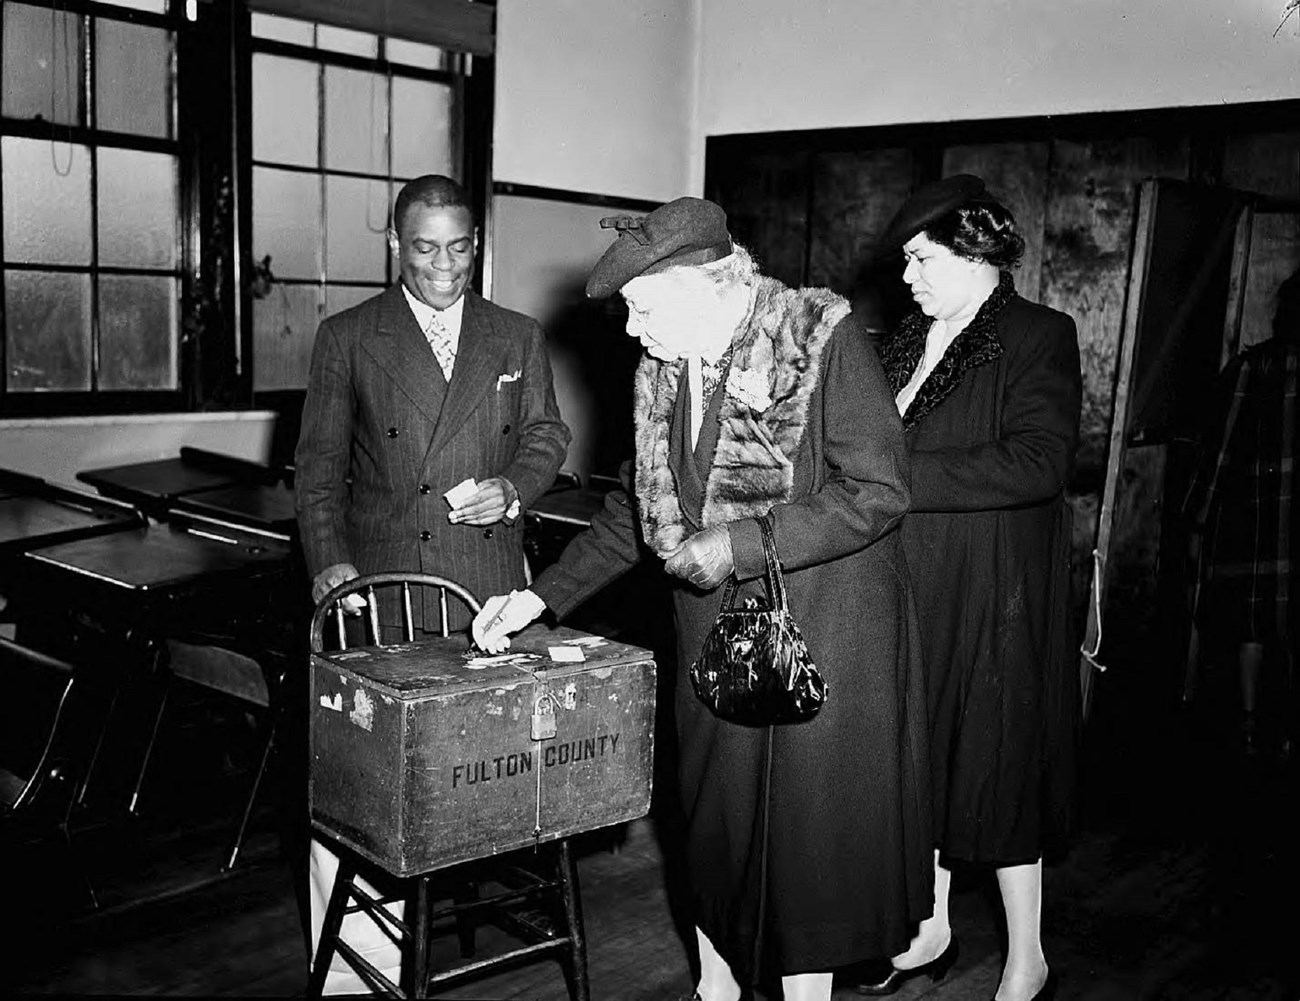 Casting ballots in the race for Fifth District, United States Congress. African American voters were crucial to Helen Douglas Mankin's electoral victory. LBME3-037a, Lane Brothers Commercial Photographers Photographic Collection, 1920-1976. Photographic C